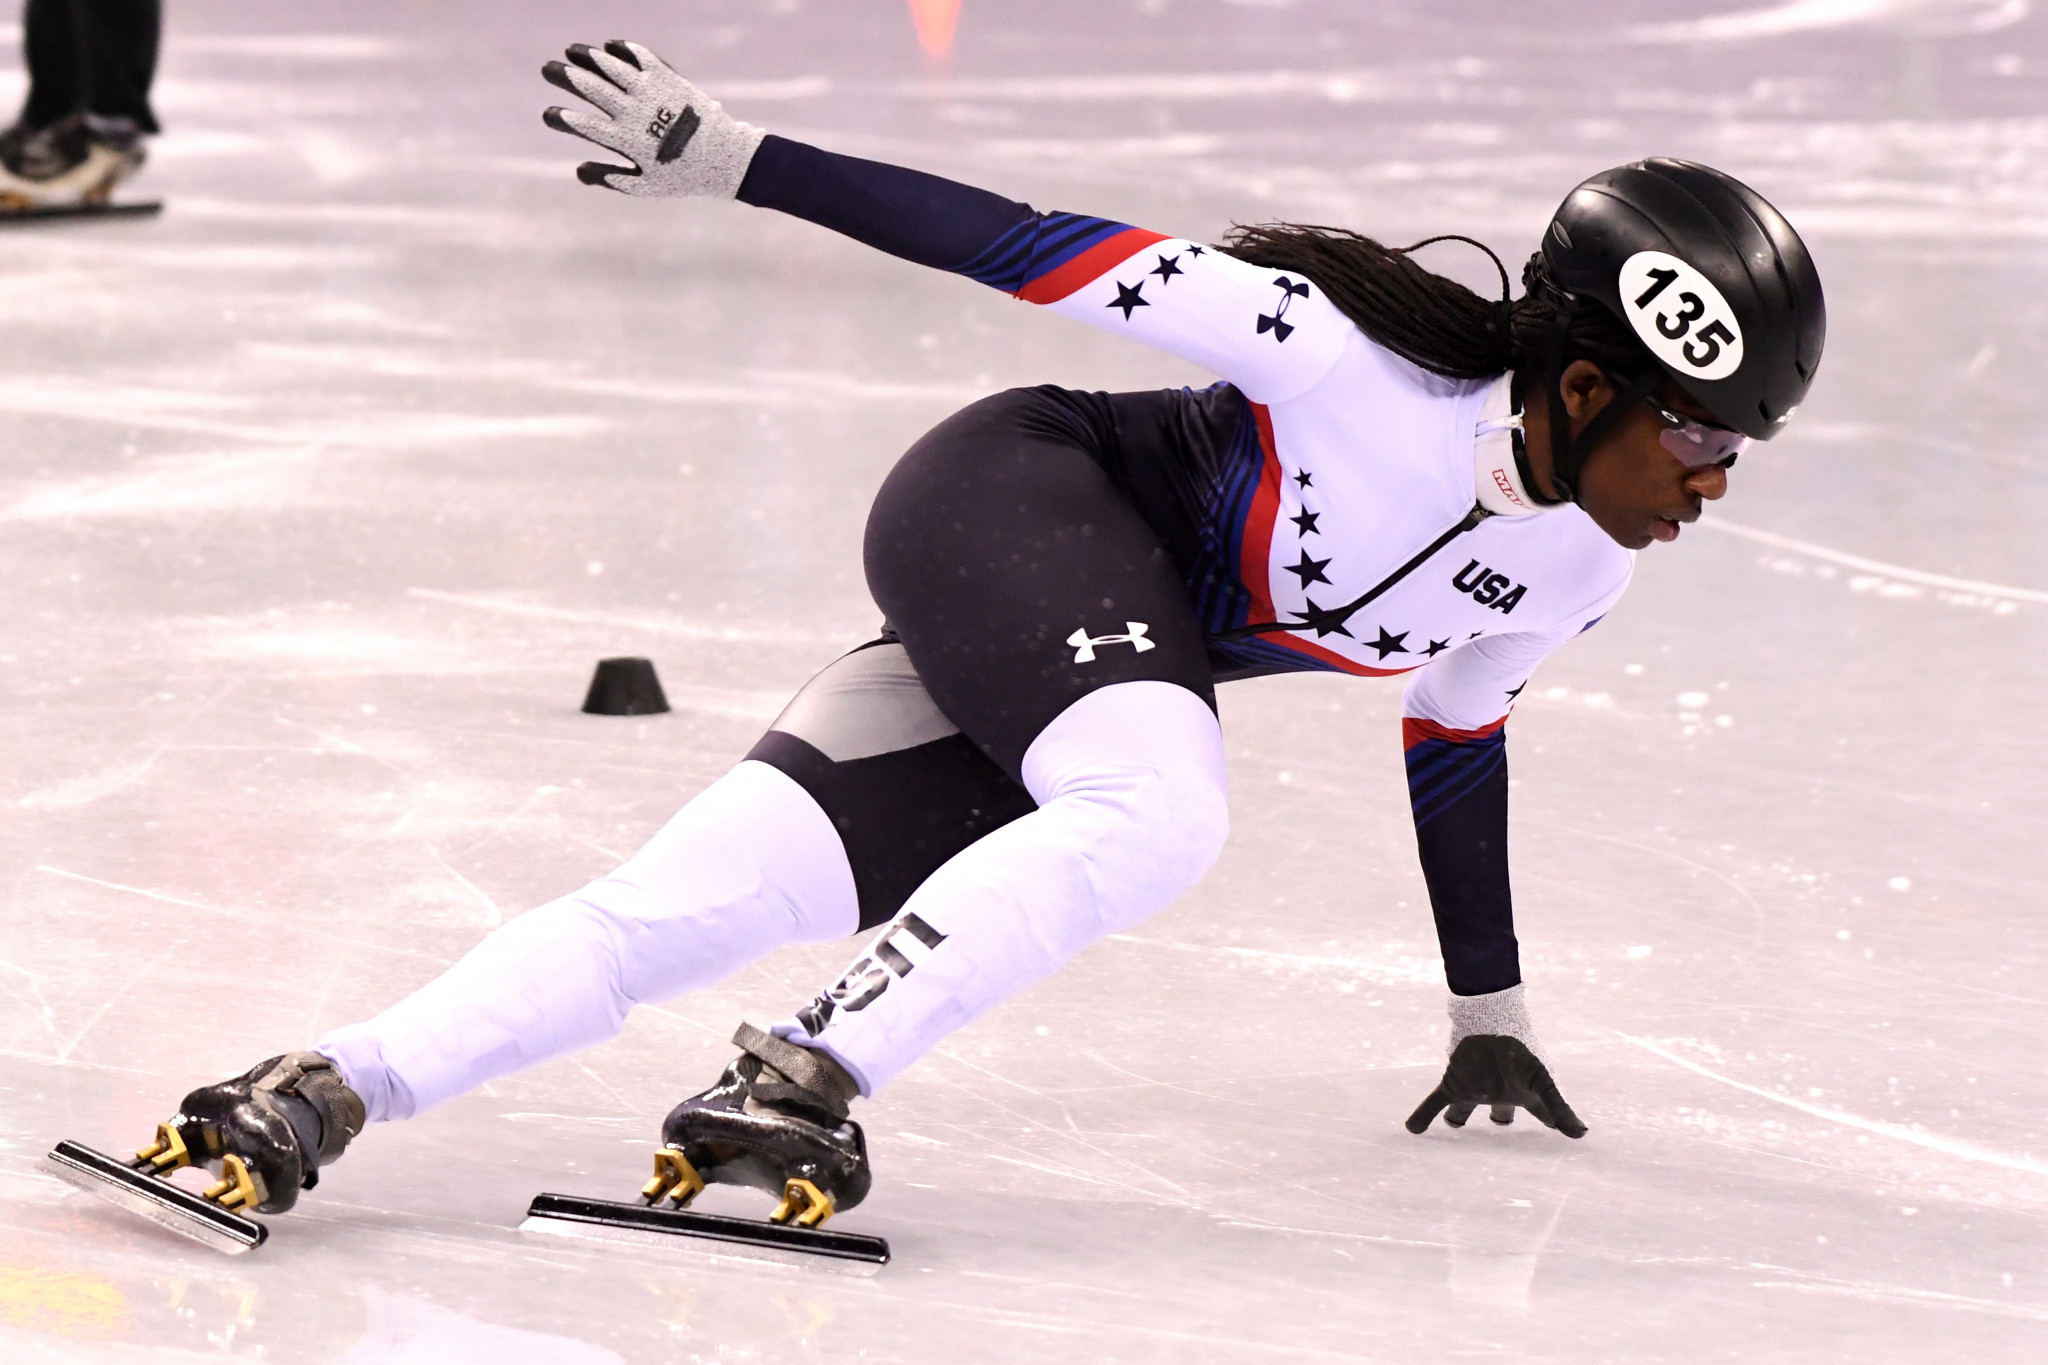 Maame Biney won the women's 500m final in front of two Dutch skaters ©Getty Images